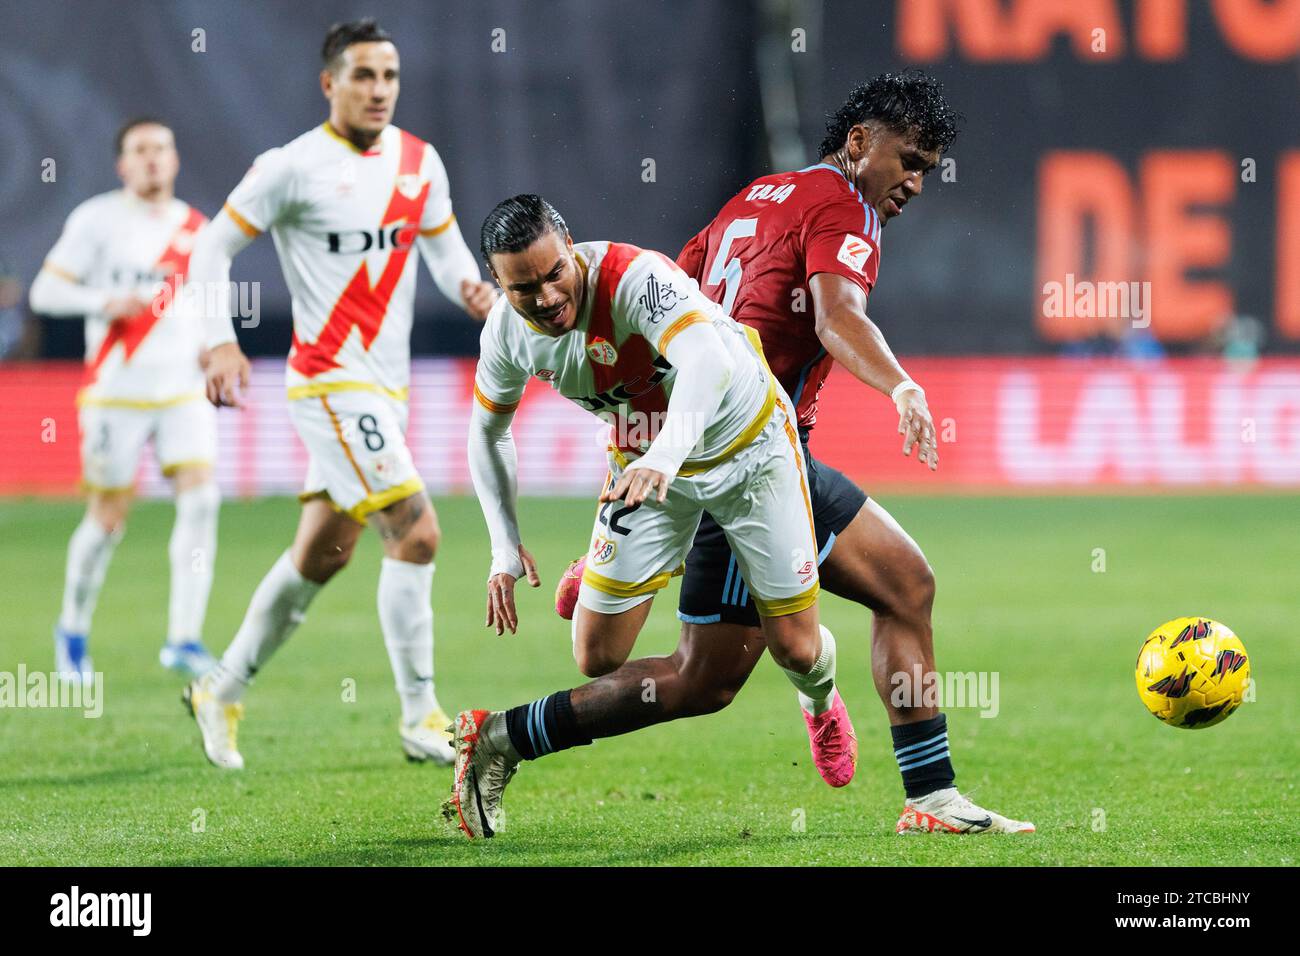 Madrid, Spain. 11th Dec, 2023. (L-R) Raul de Tomas of Rayo Vallecano and Renato Tapia of Celta de Vigo in action during the LaLiga EA Sports 2023/24 match between Rayo Vallecano and Celta de Vigo at Vallecas Stadium. Rayo Vallecano 0 : 0 Celta Vigo Credit: SOPA Images Limited/Alamy Live News Stock Photo